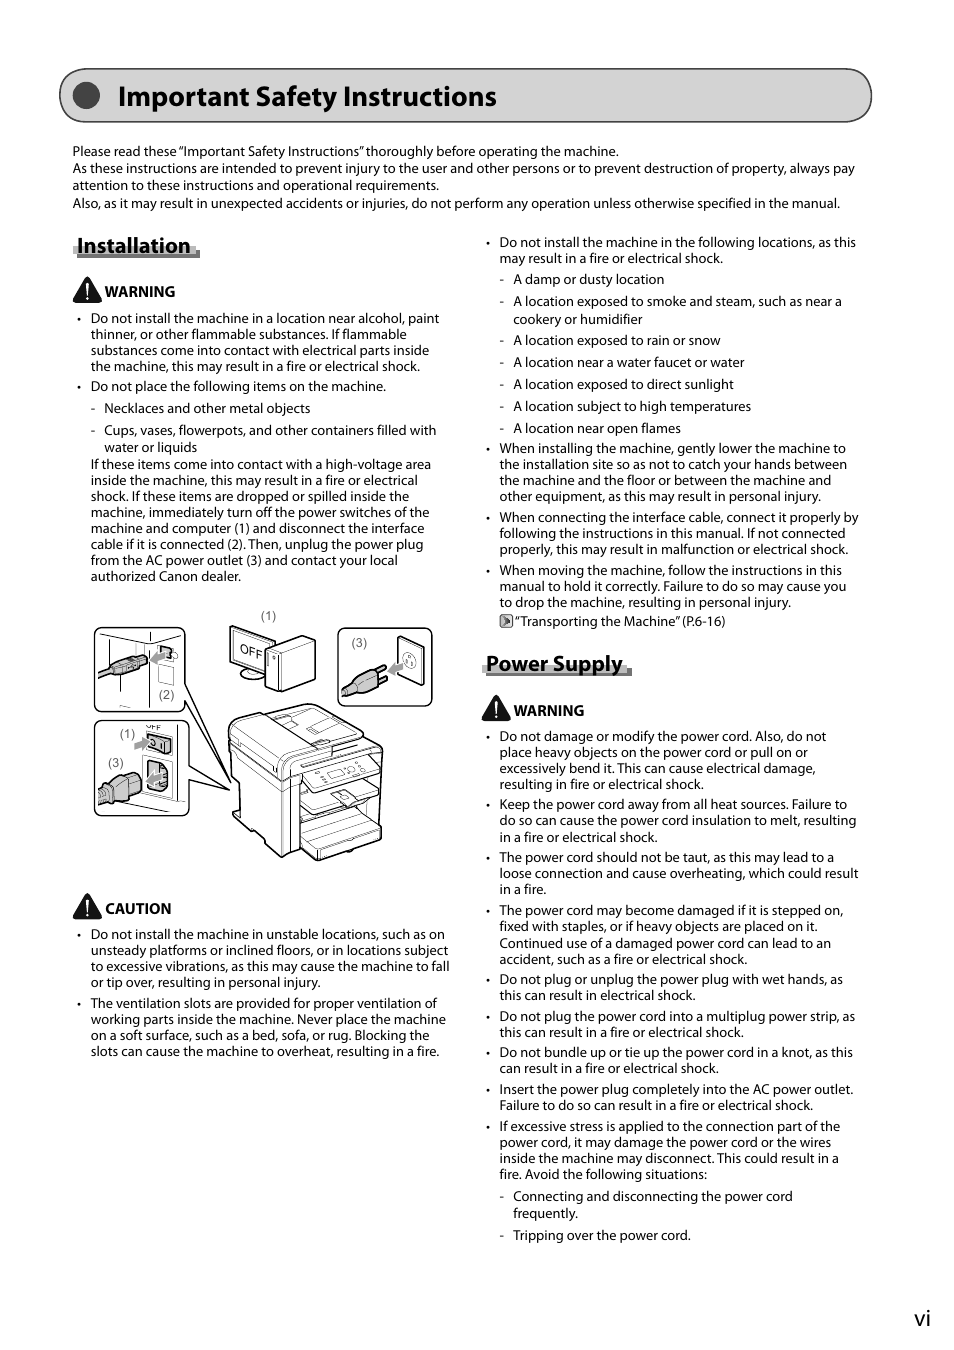 Important safety instructions, Installation, Power supply | Canon imageCLASS D550 User Manual | Page 9 / 116